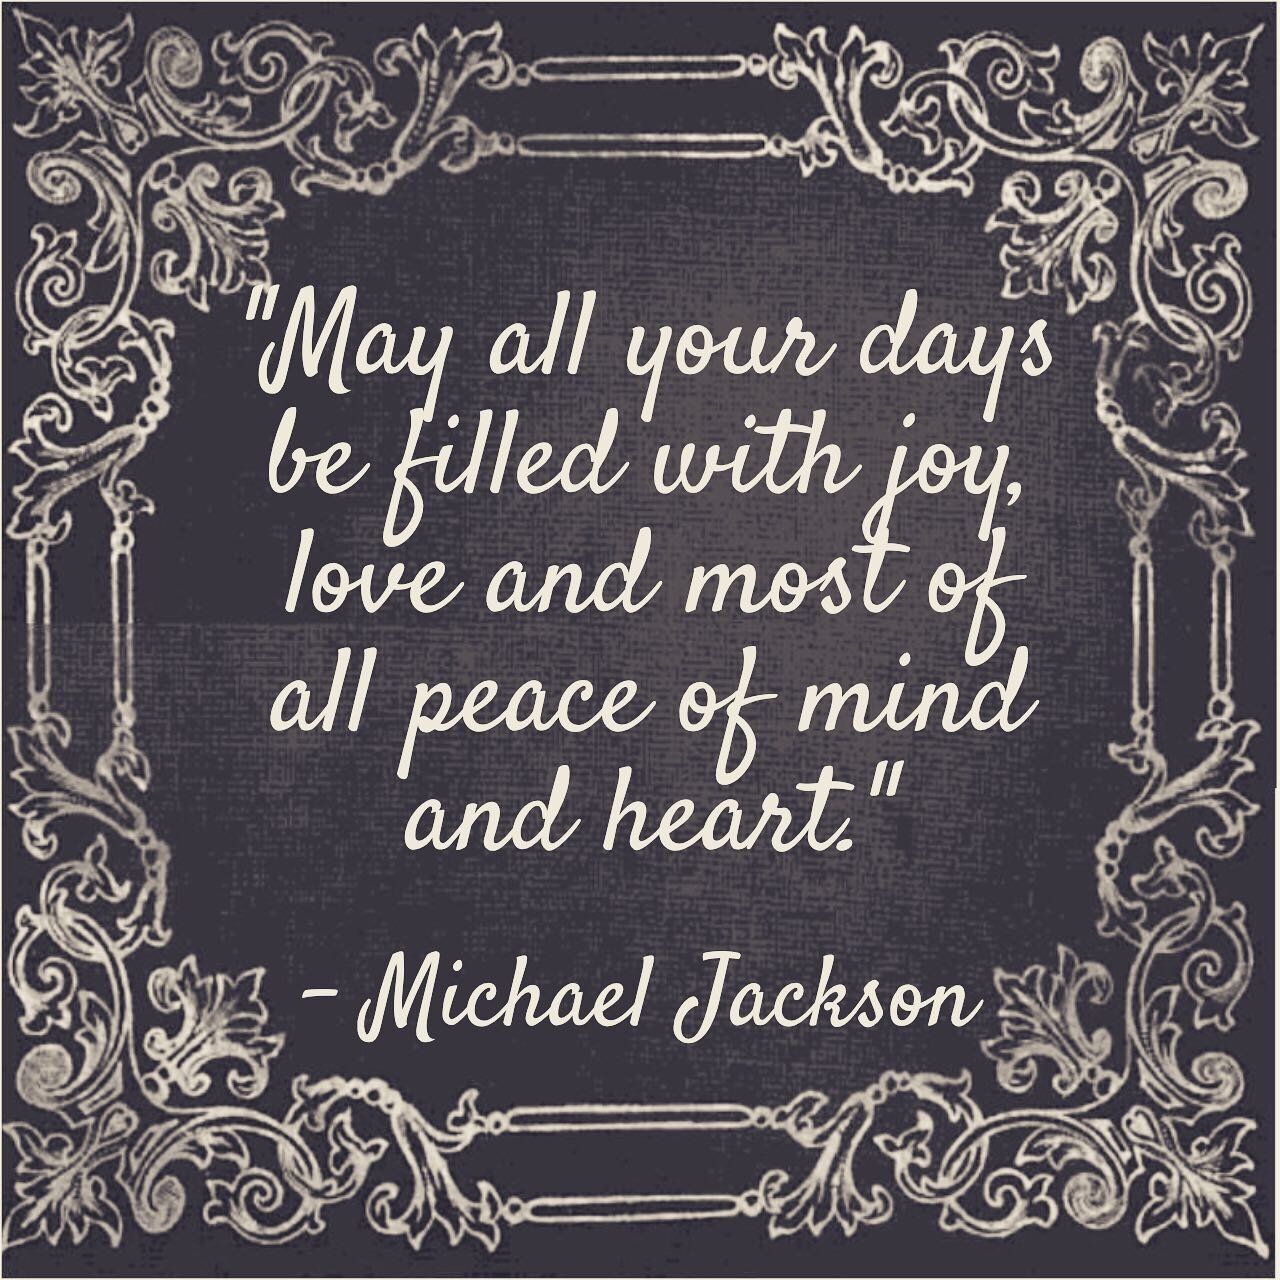 This is a line from a letter that Michael wrote to two other fans and me in Las Vegas in the summer of 2007. You can hear about how this line became more meaningful to me over time in my interview with the @booksaboutmj team, on Facebook and YouTube 